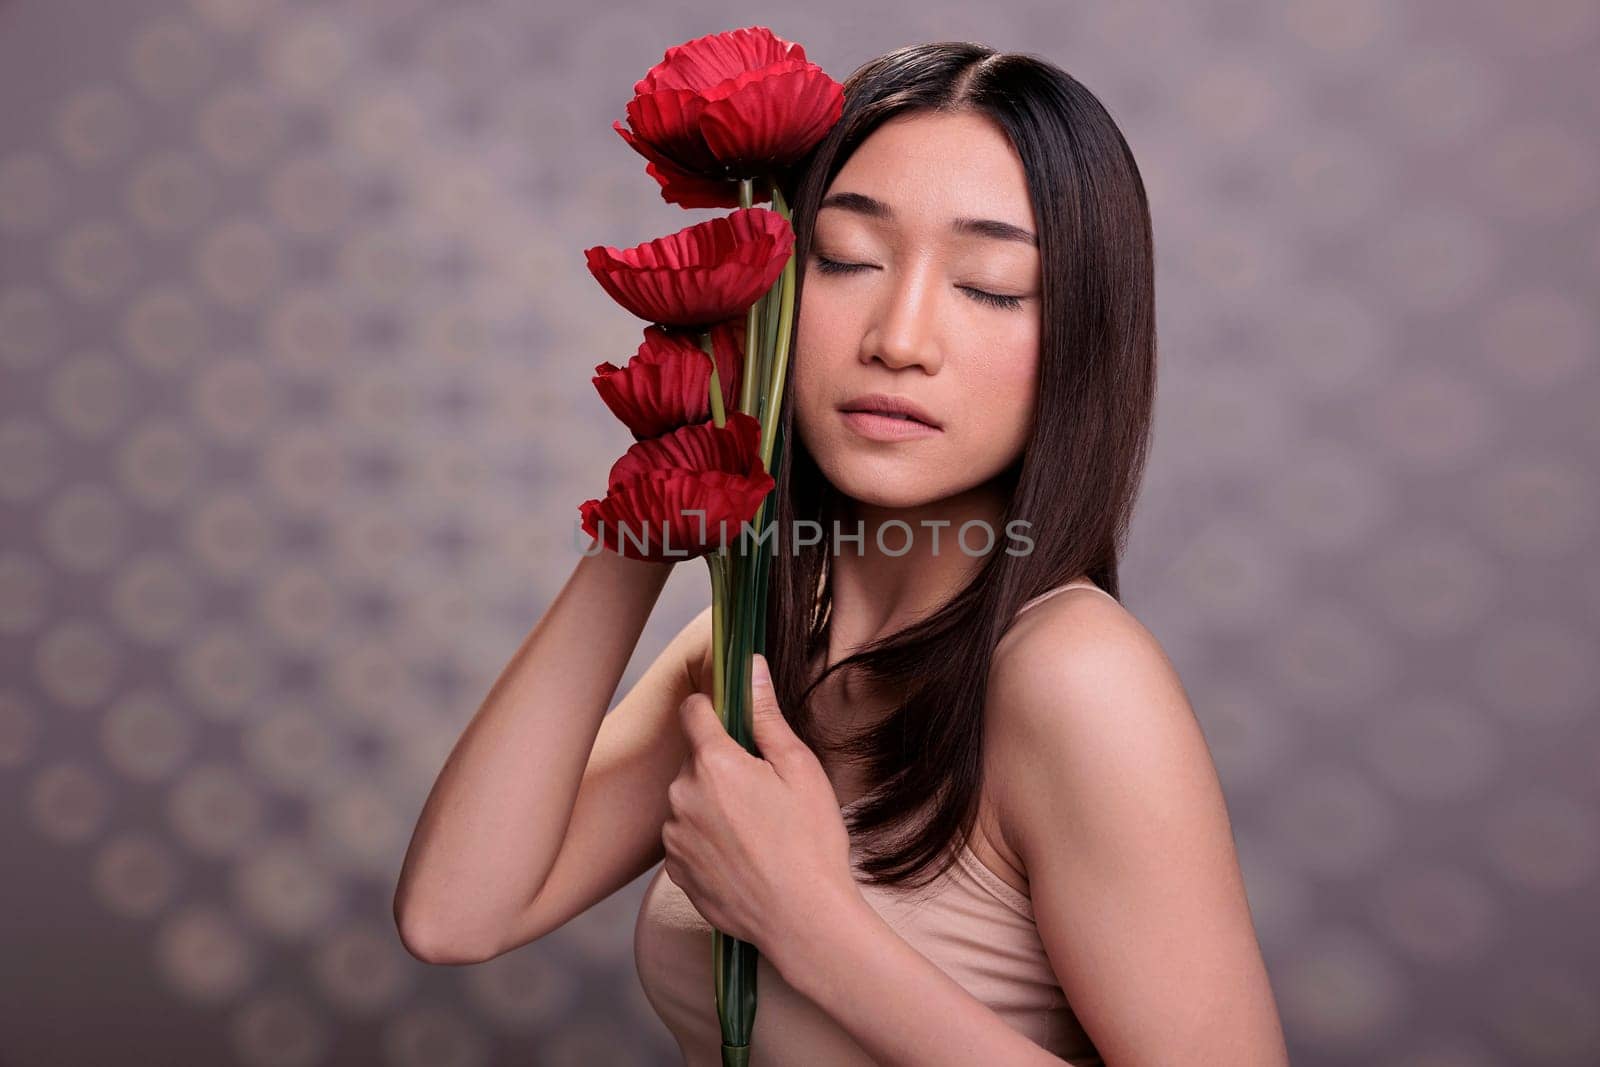 Asian woman with closed eyes holding red poppies branch. Beautiful young model wearing beige casual top, standing with summer flowers bouquet, showing skincare and body care concept